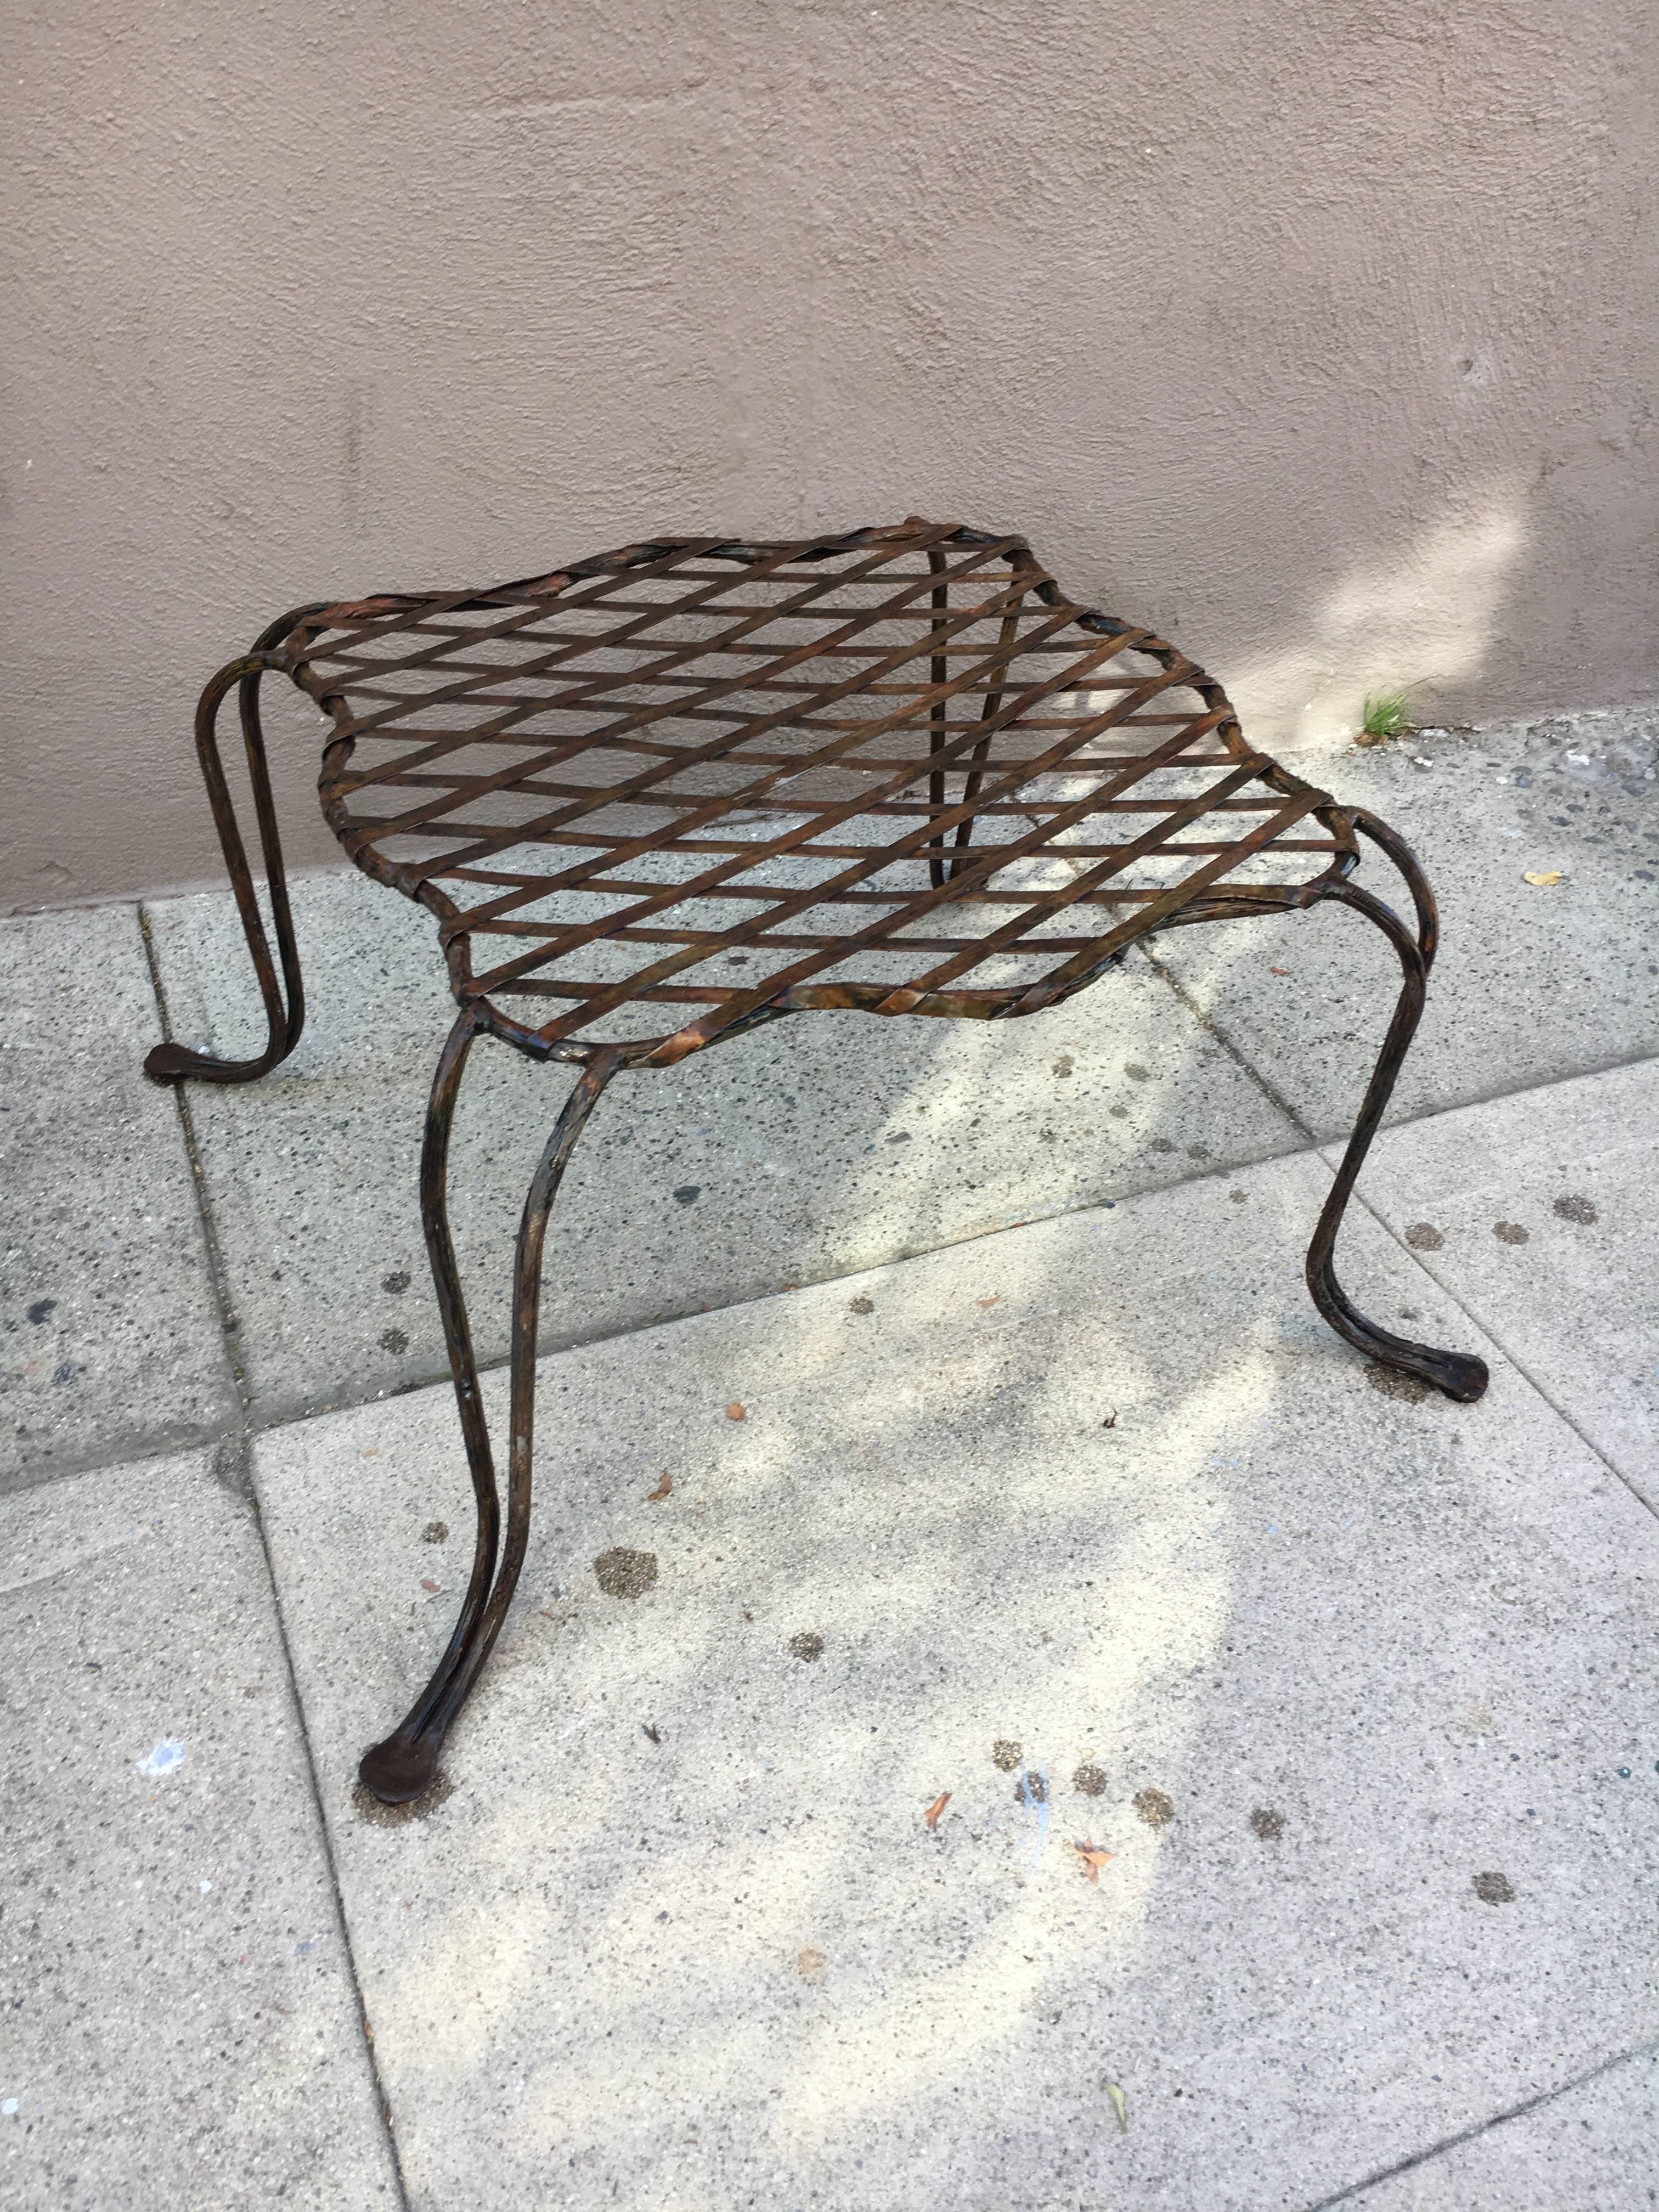 Rose Tarlow Melrose house wrought iron twig ottoman (the iron work is an iron 'twig' rod) - a spectacular example of beautiful design by world renowned designer, Rose Tarlow. We also have the matching twig chairs available. The ottoman also easily